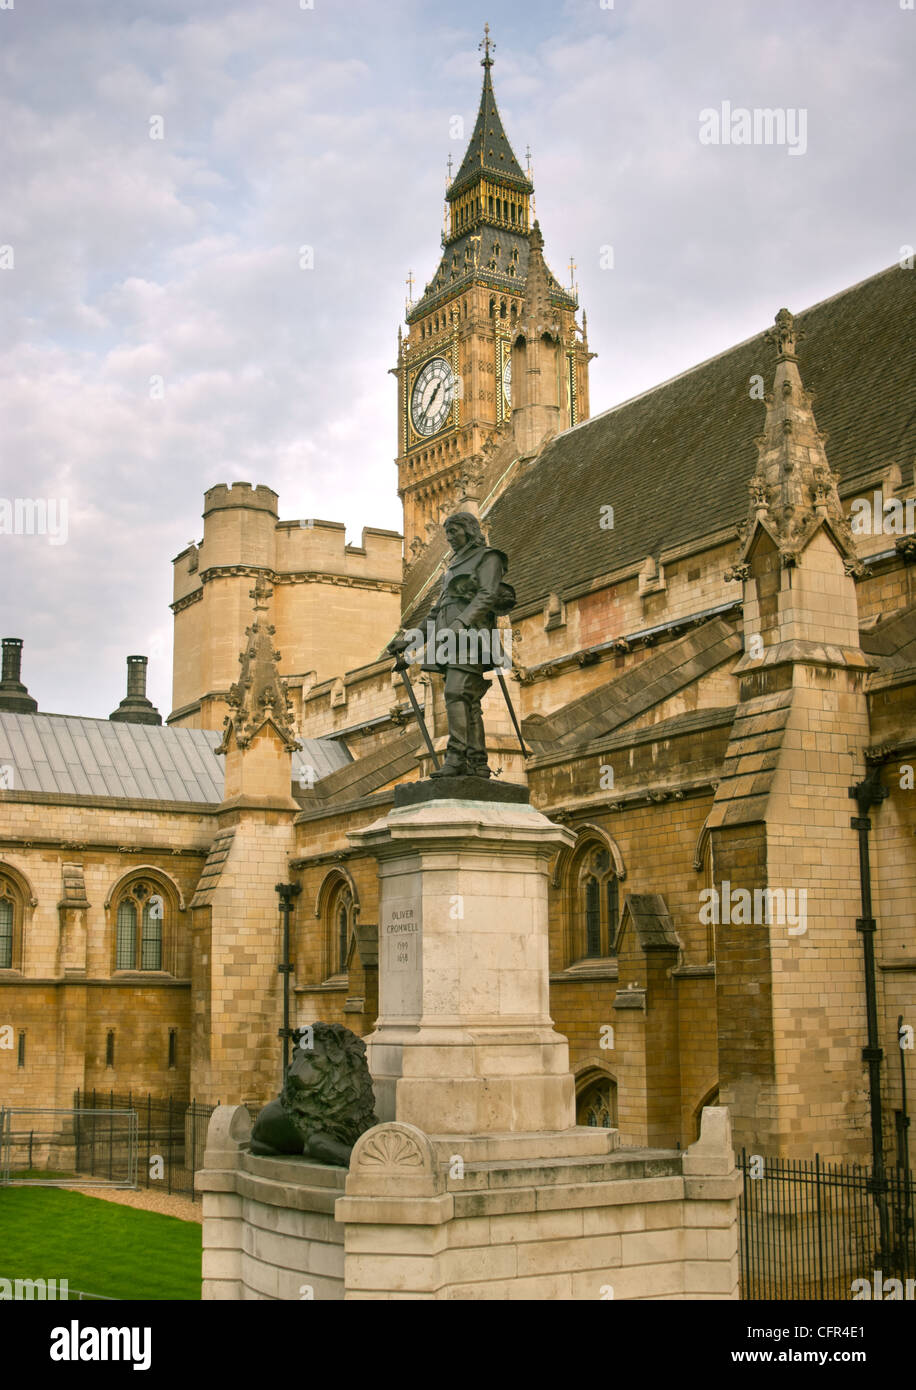 View of the House of Commons from Paliament Square., London, England UK. Statues of Oliver Cromwell  in the foreground. Stock Photo